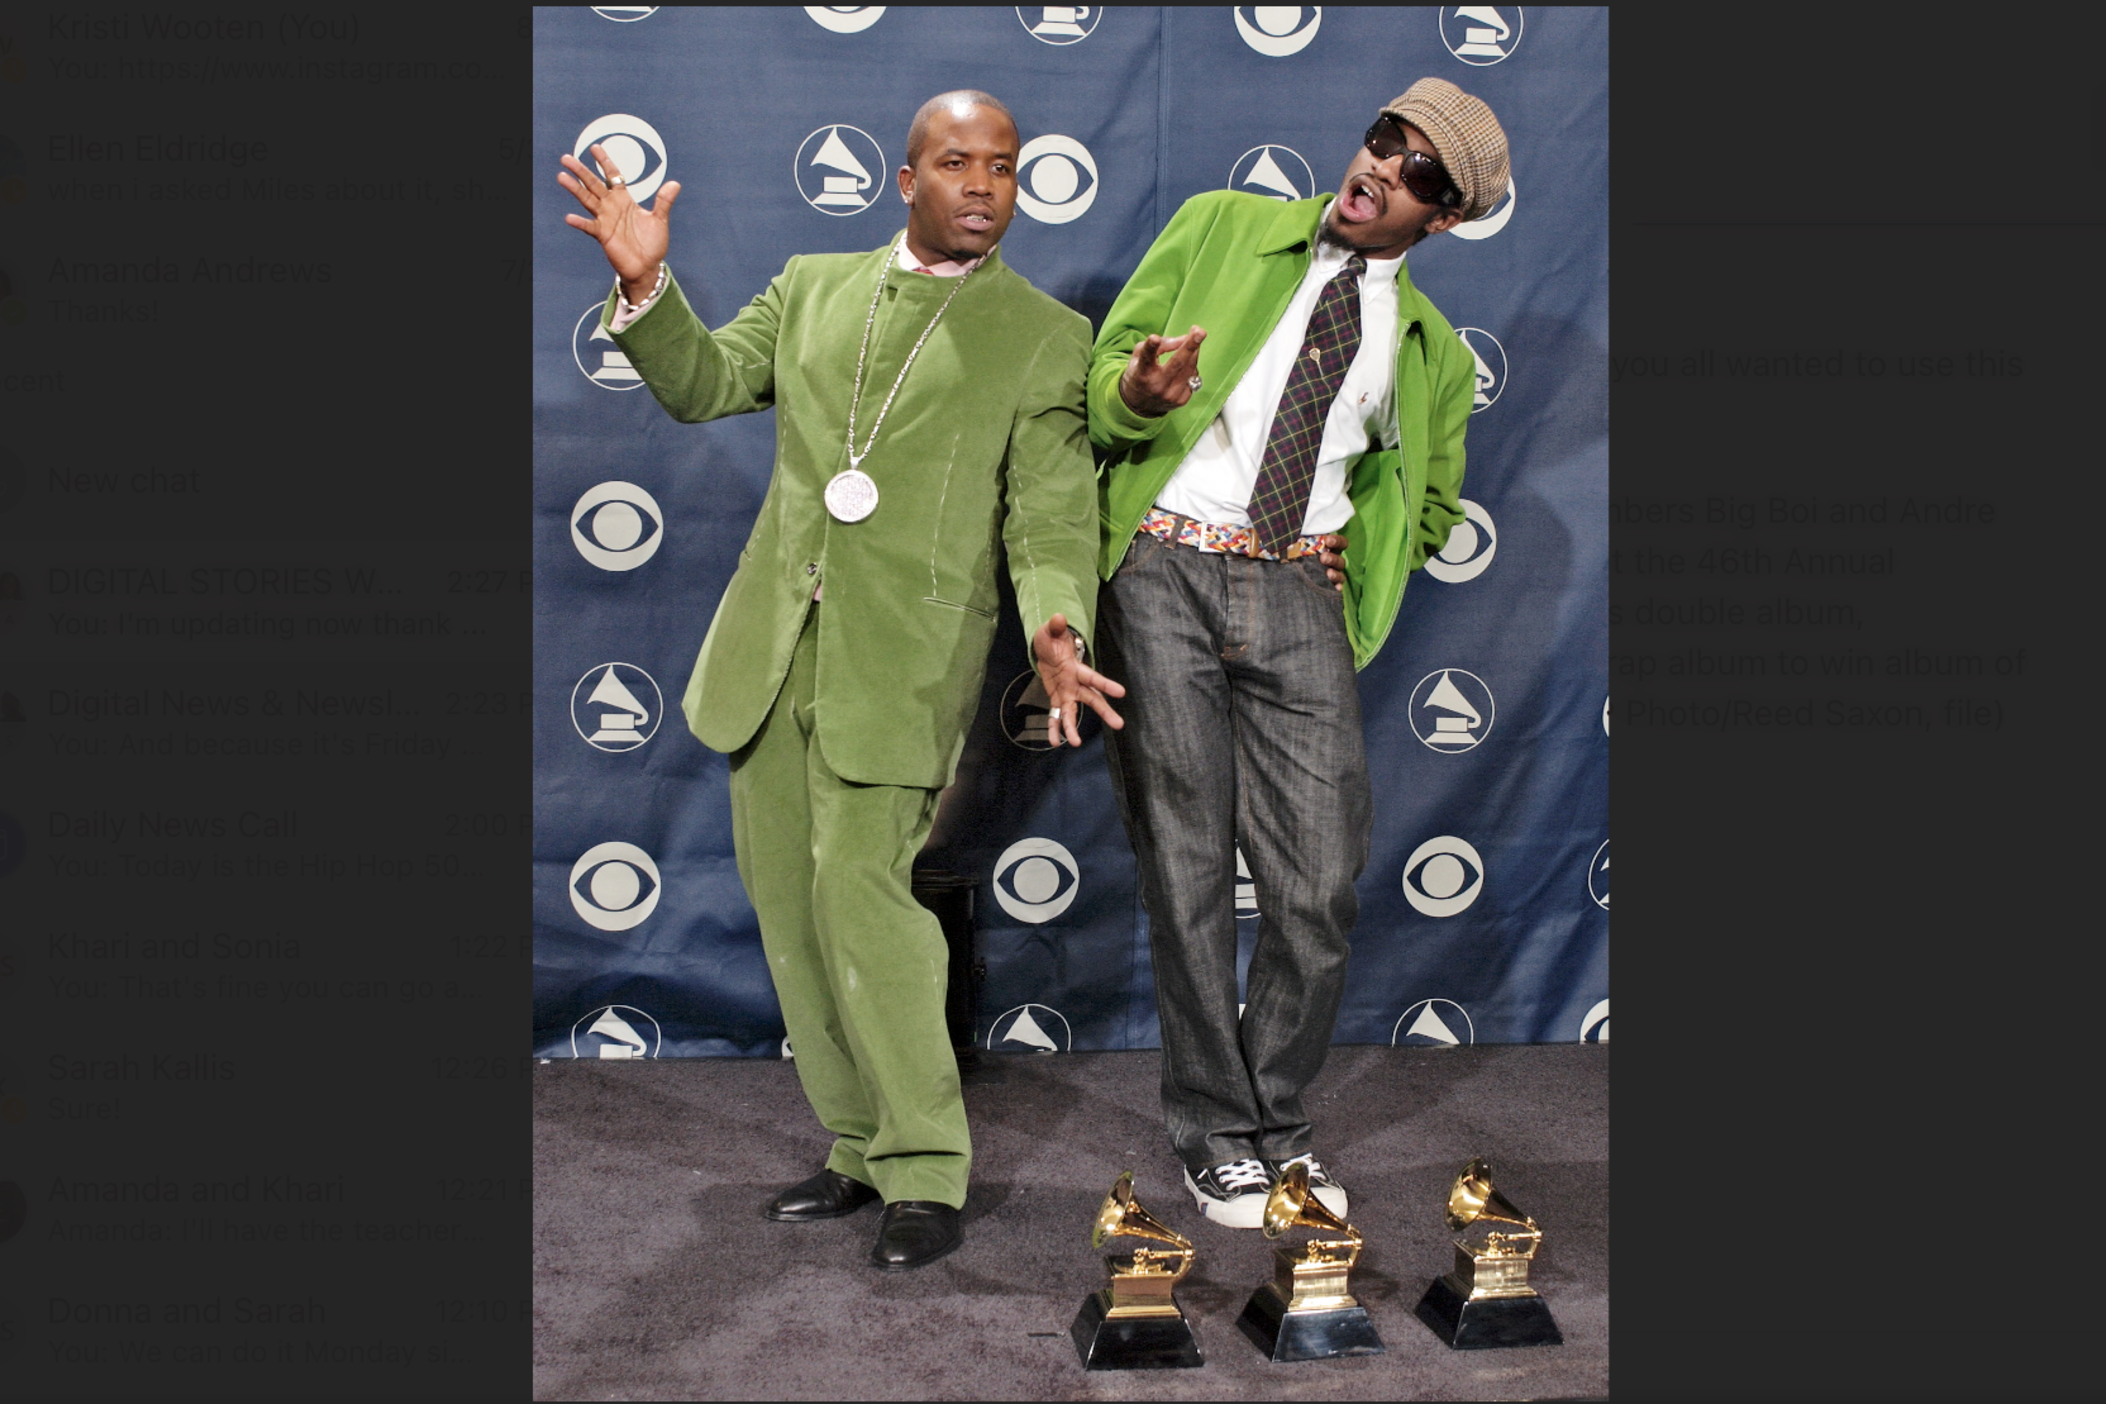 In this Feb. 8, 2004, file photo, OutKast members Big Boi and Andre 3000 pose in front of the three awards they won at the 46th Annual Grammy Awards in Los Angeles. In 2004 OutKast's double album, “Speakerboxxx/The Love Below," was the second rap album to win album of the year.